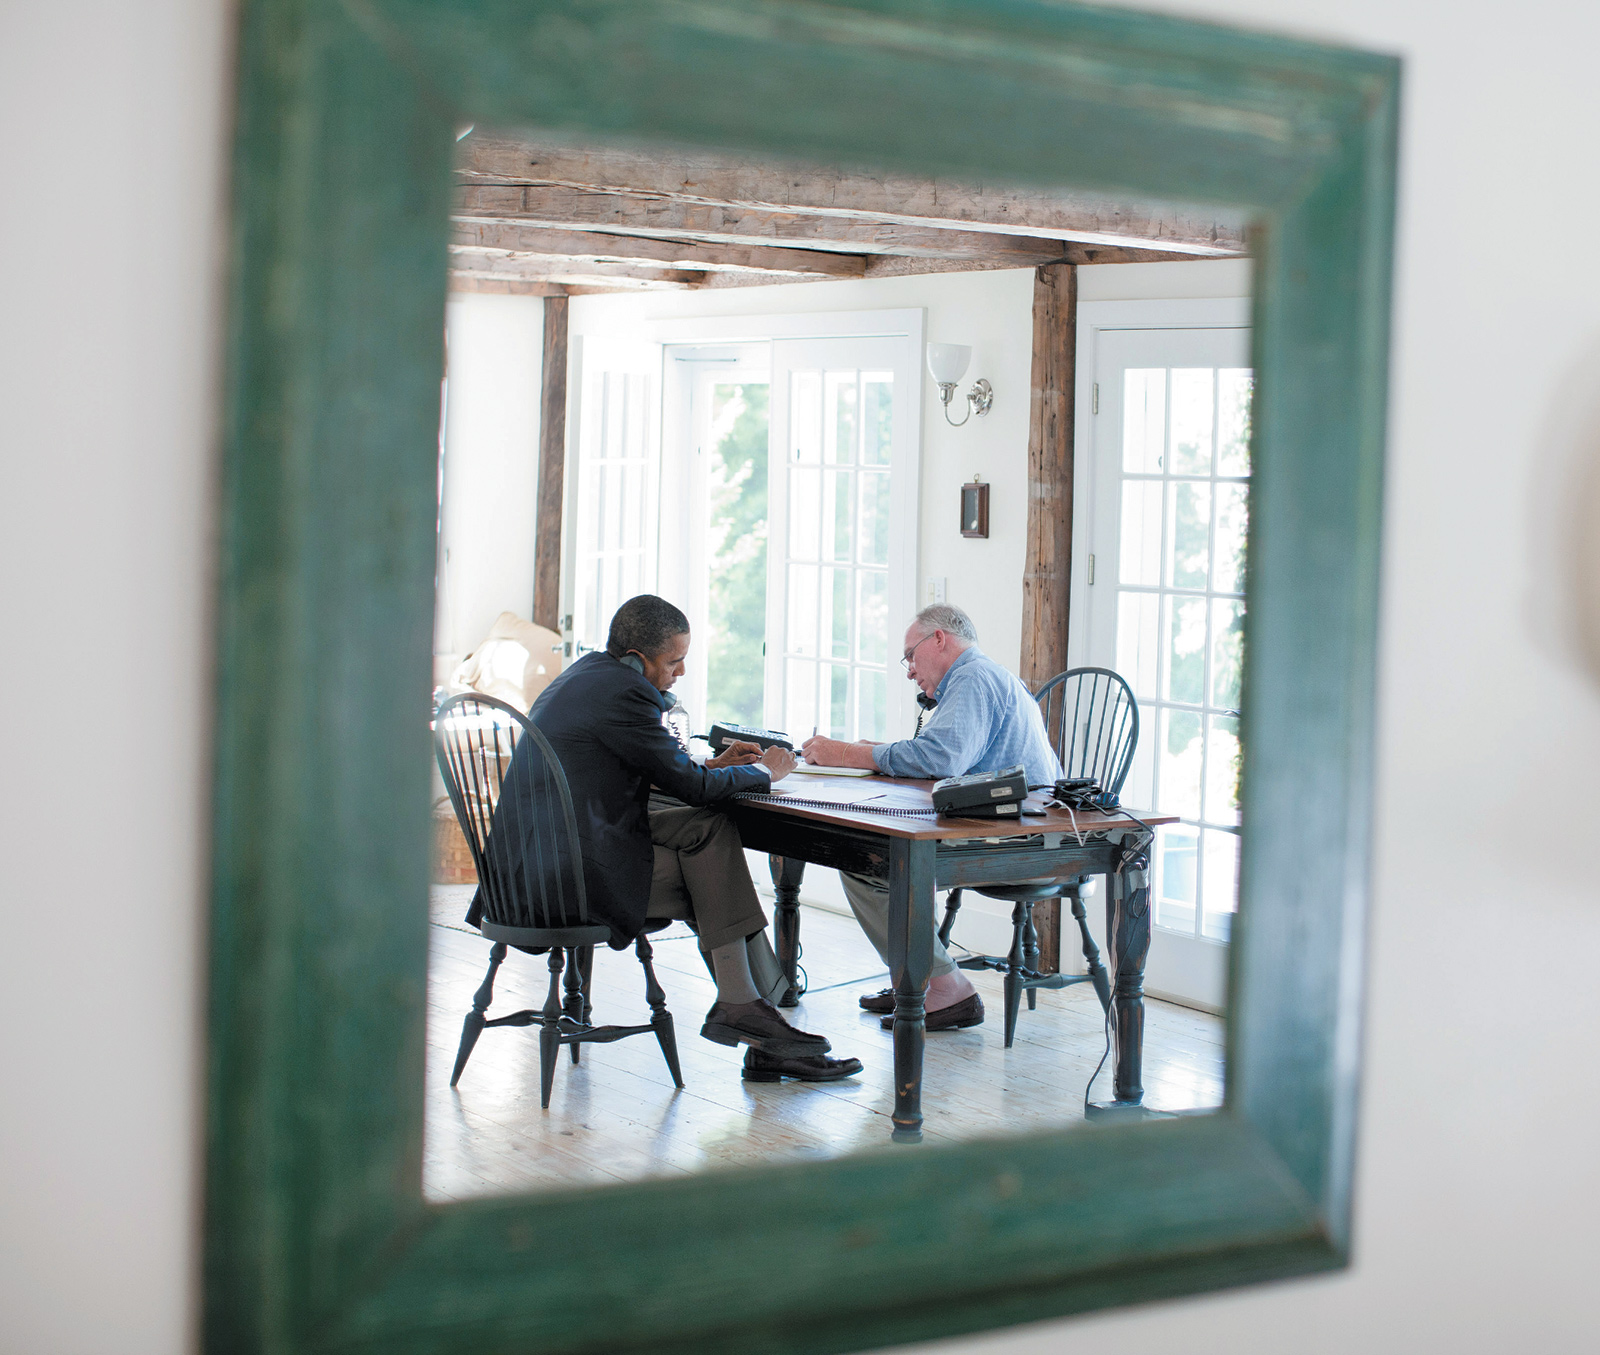 President Obama and John Brennan, then assistant to the president for homeland security and counterterrorism, on a conference call about the situation in Libya, Martha’s Vineyard, August 2011